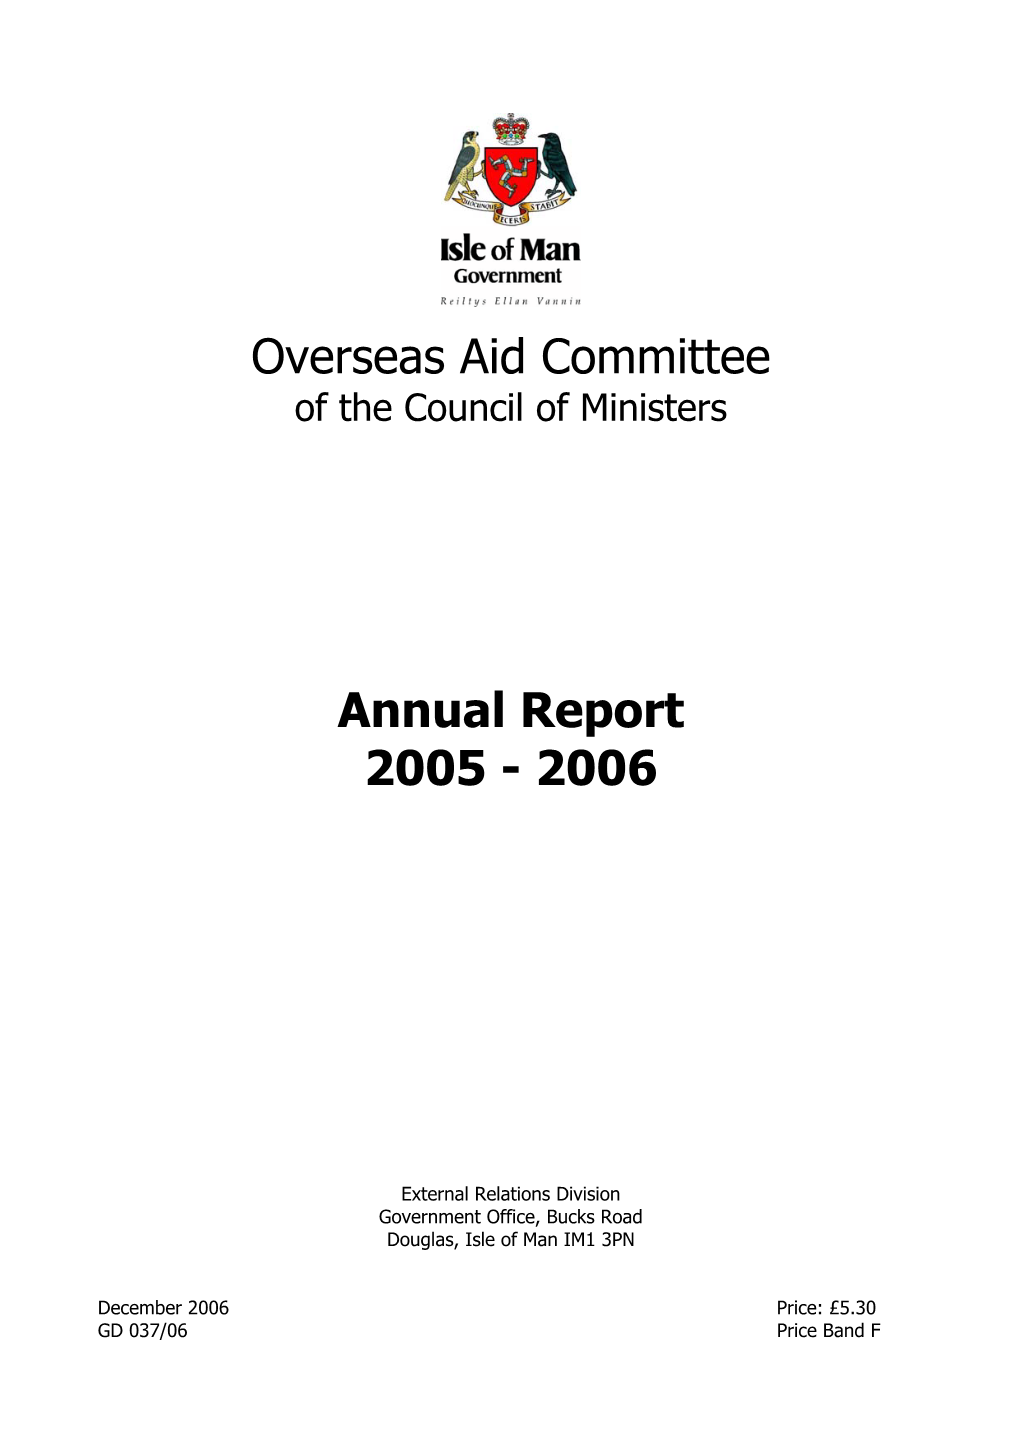 Overseas Aid Committee Annual Report 2005-06